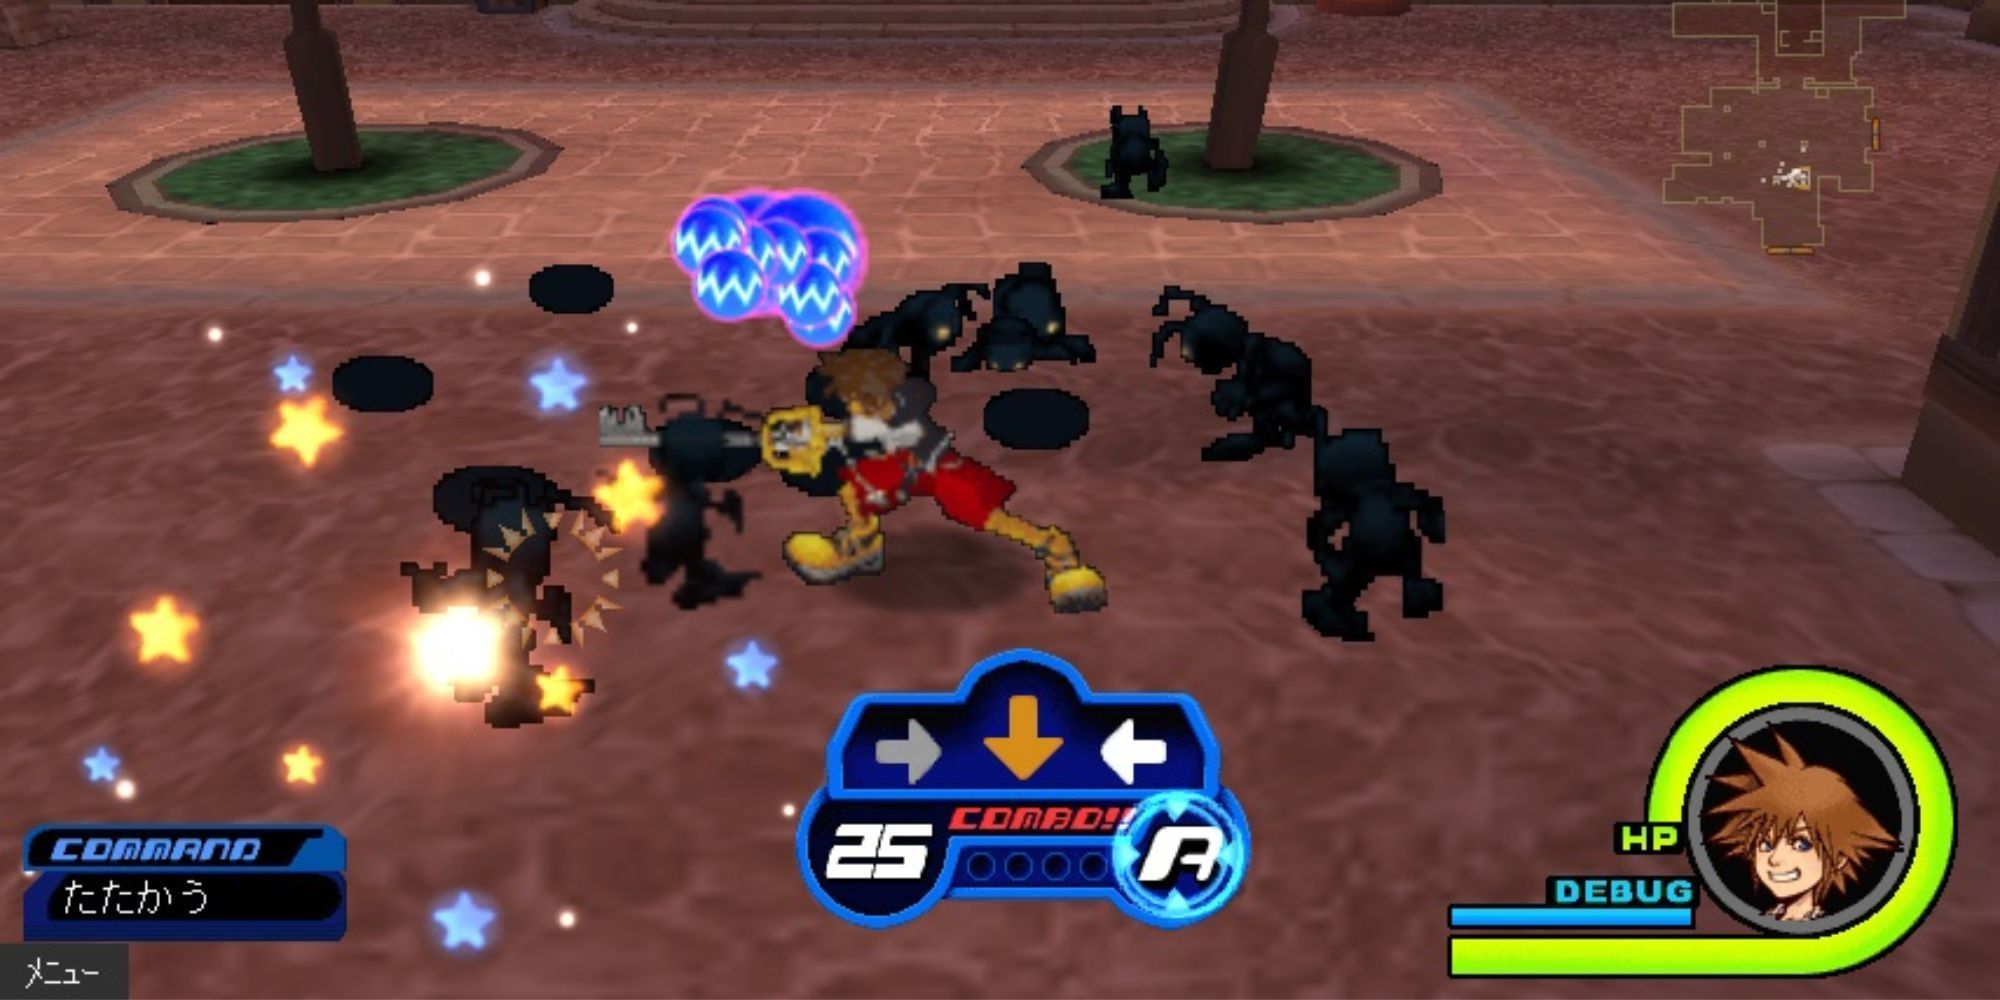 Sora defeating some Heartless in Traverse Town.